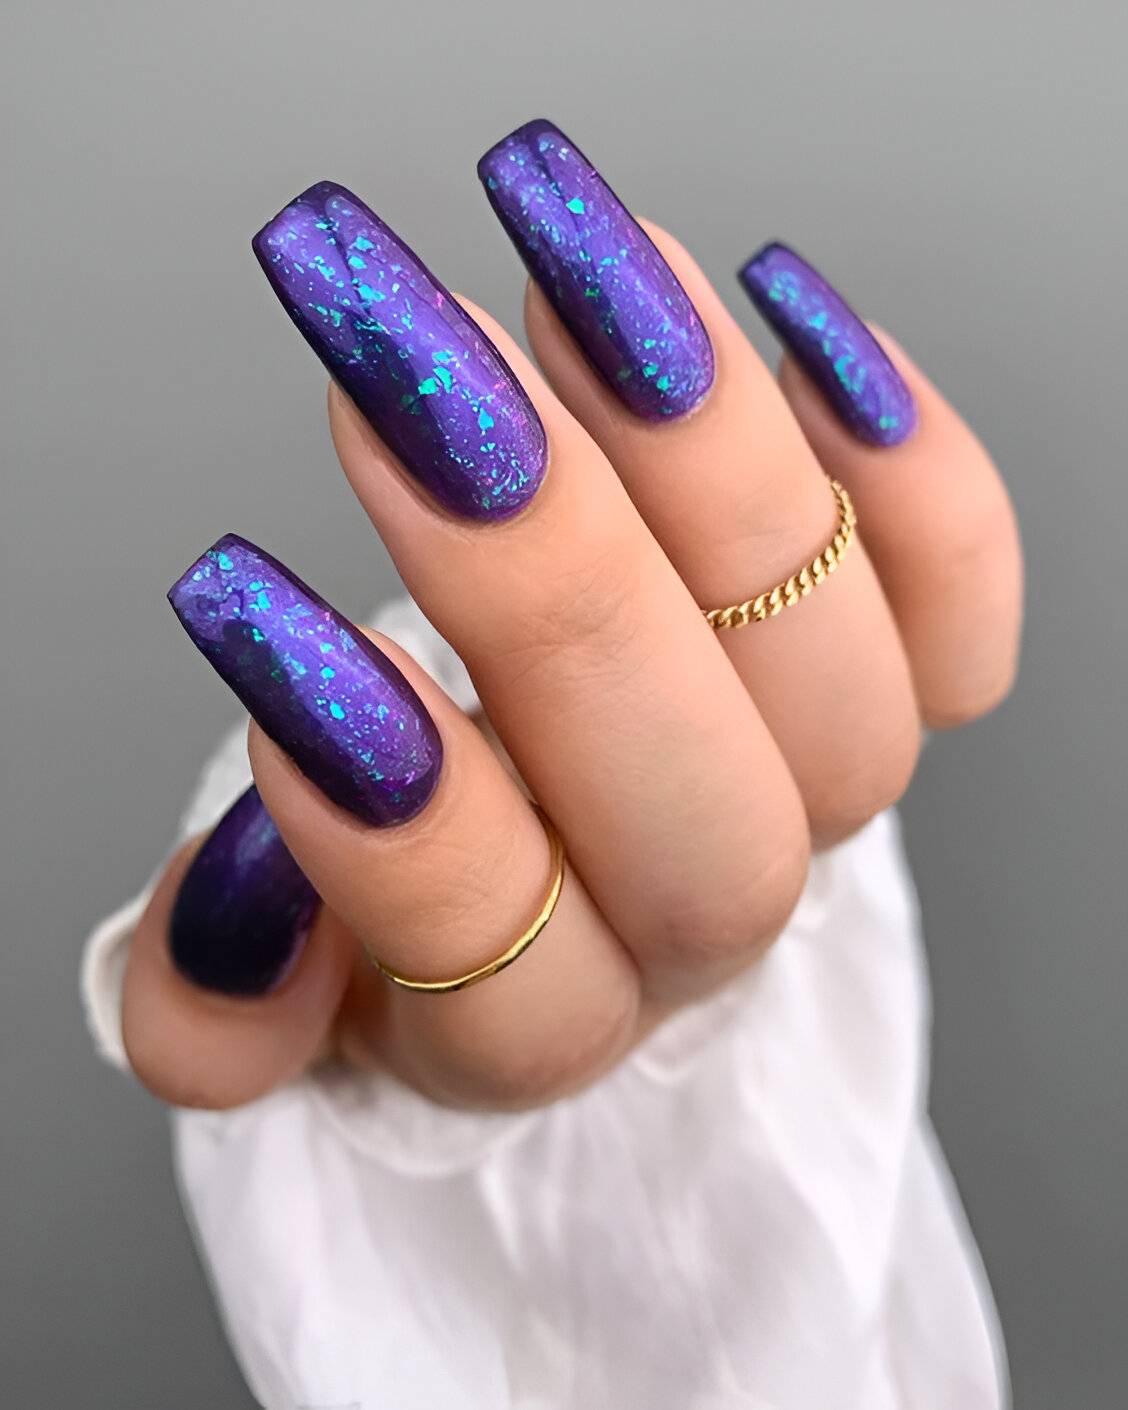 30 Chic Chrome Nail Designs For The Ultimate Glam Look - 229